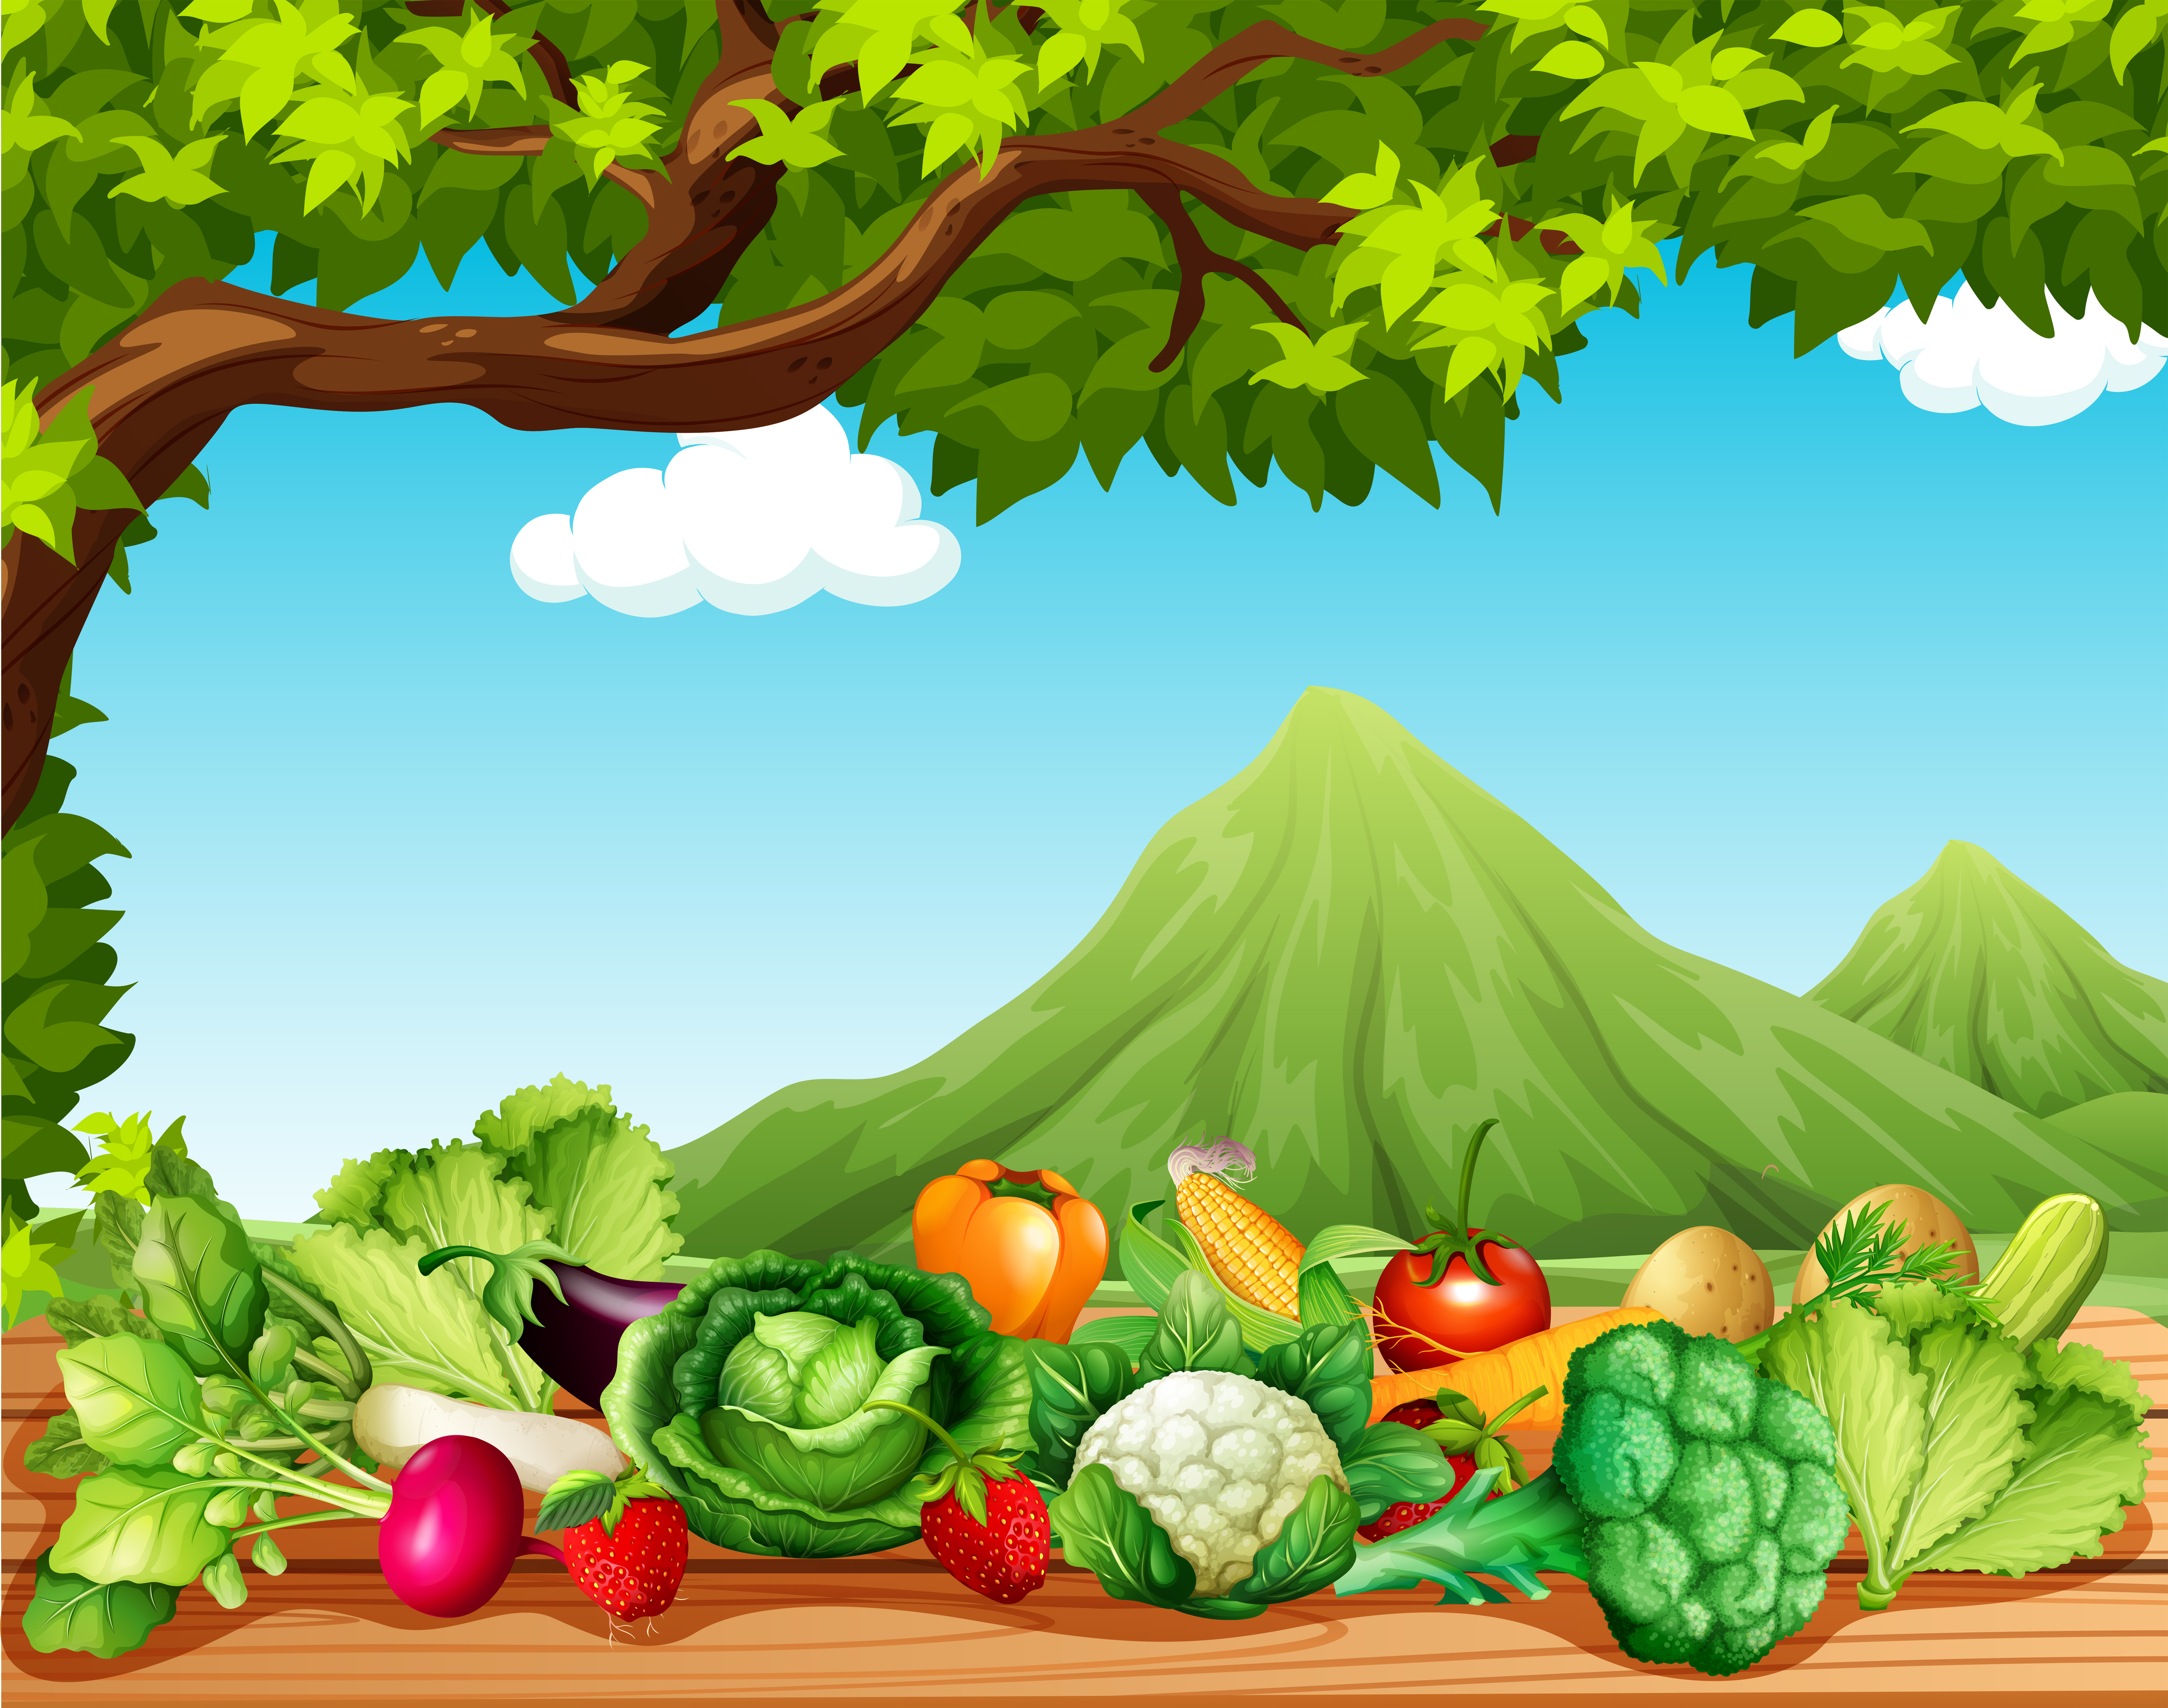 Fruits and vegetables on the table - Download Free Vectors, Clipart